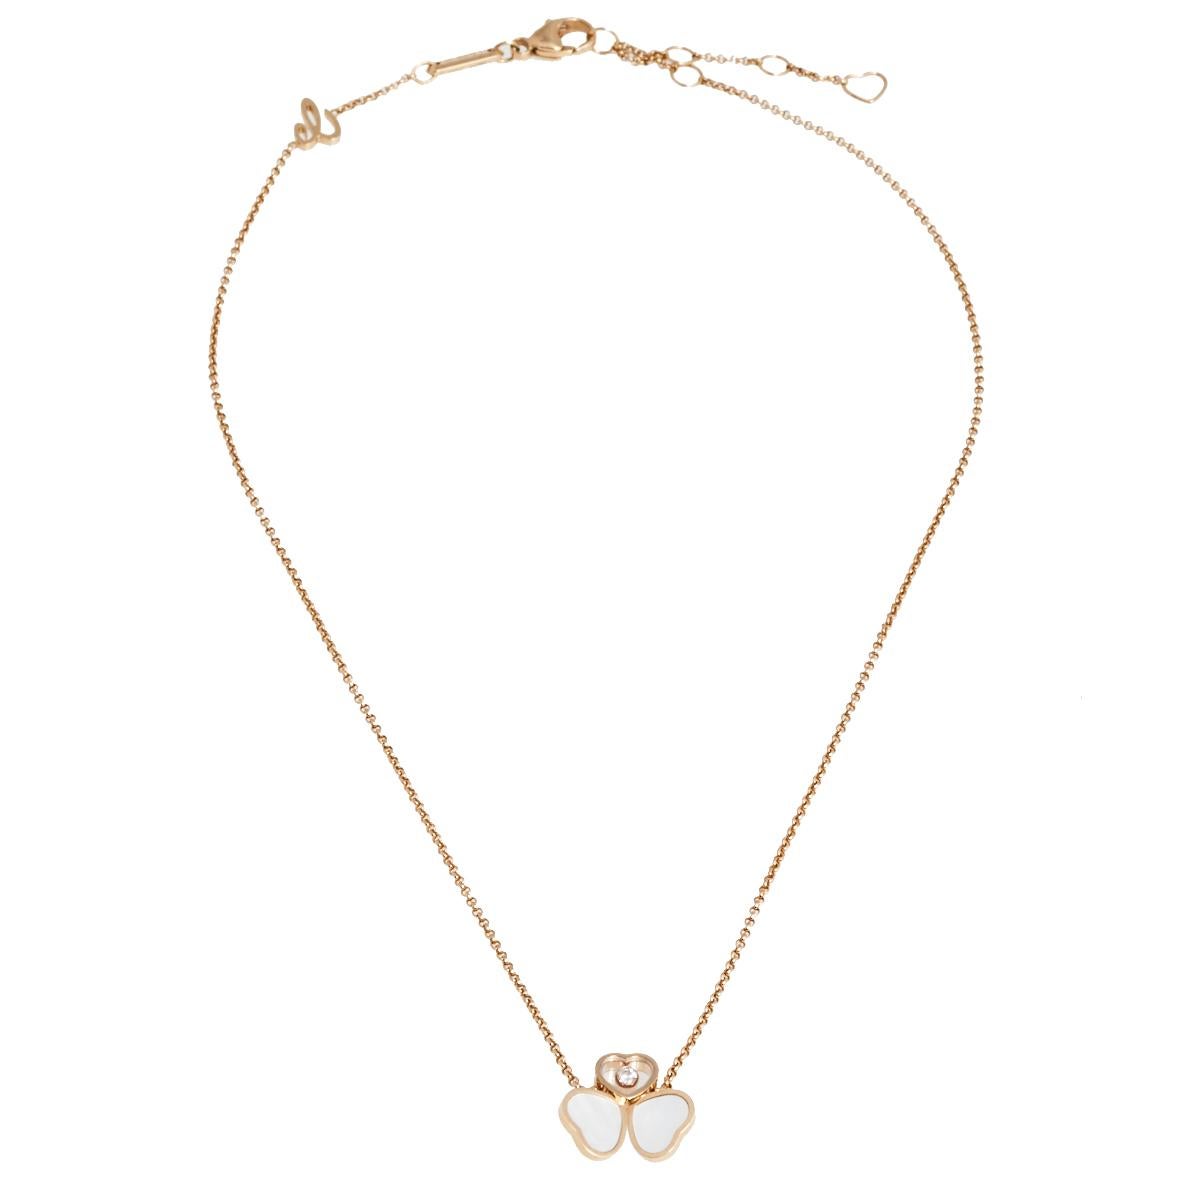 A gathering of three heart motifs — in 18k rose gold — and one of them holding a caged diamond brings out the true beauty of Chopard and their idea of love and freedom. The stunning necklace aims to add elegance to your neckline and exude timeless